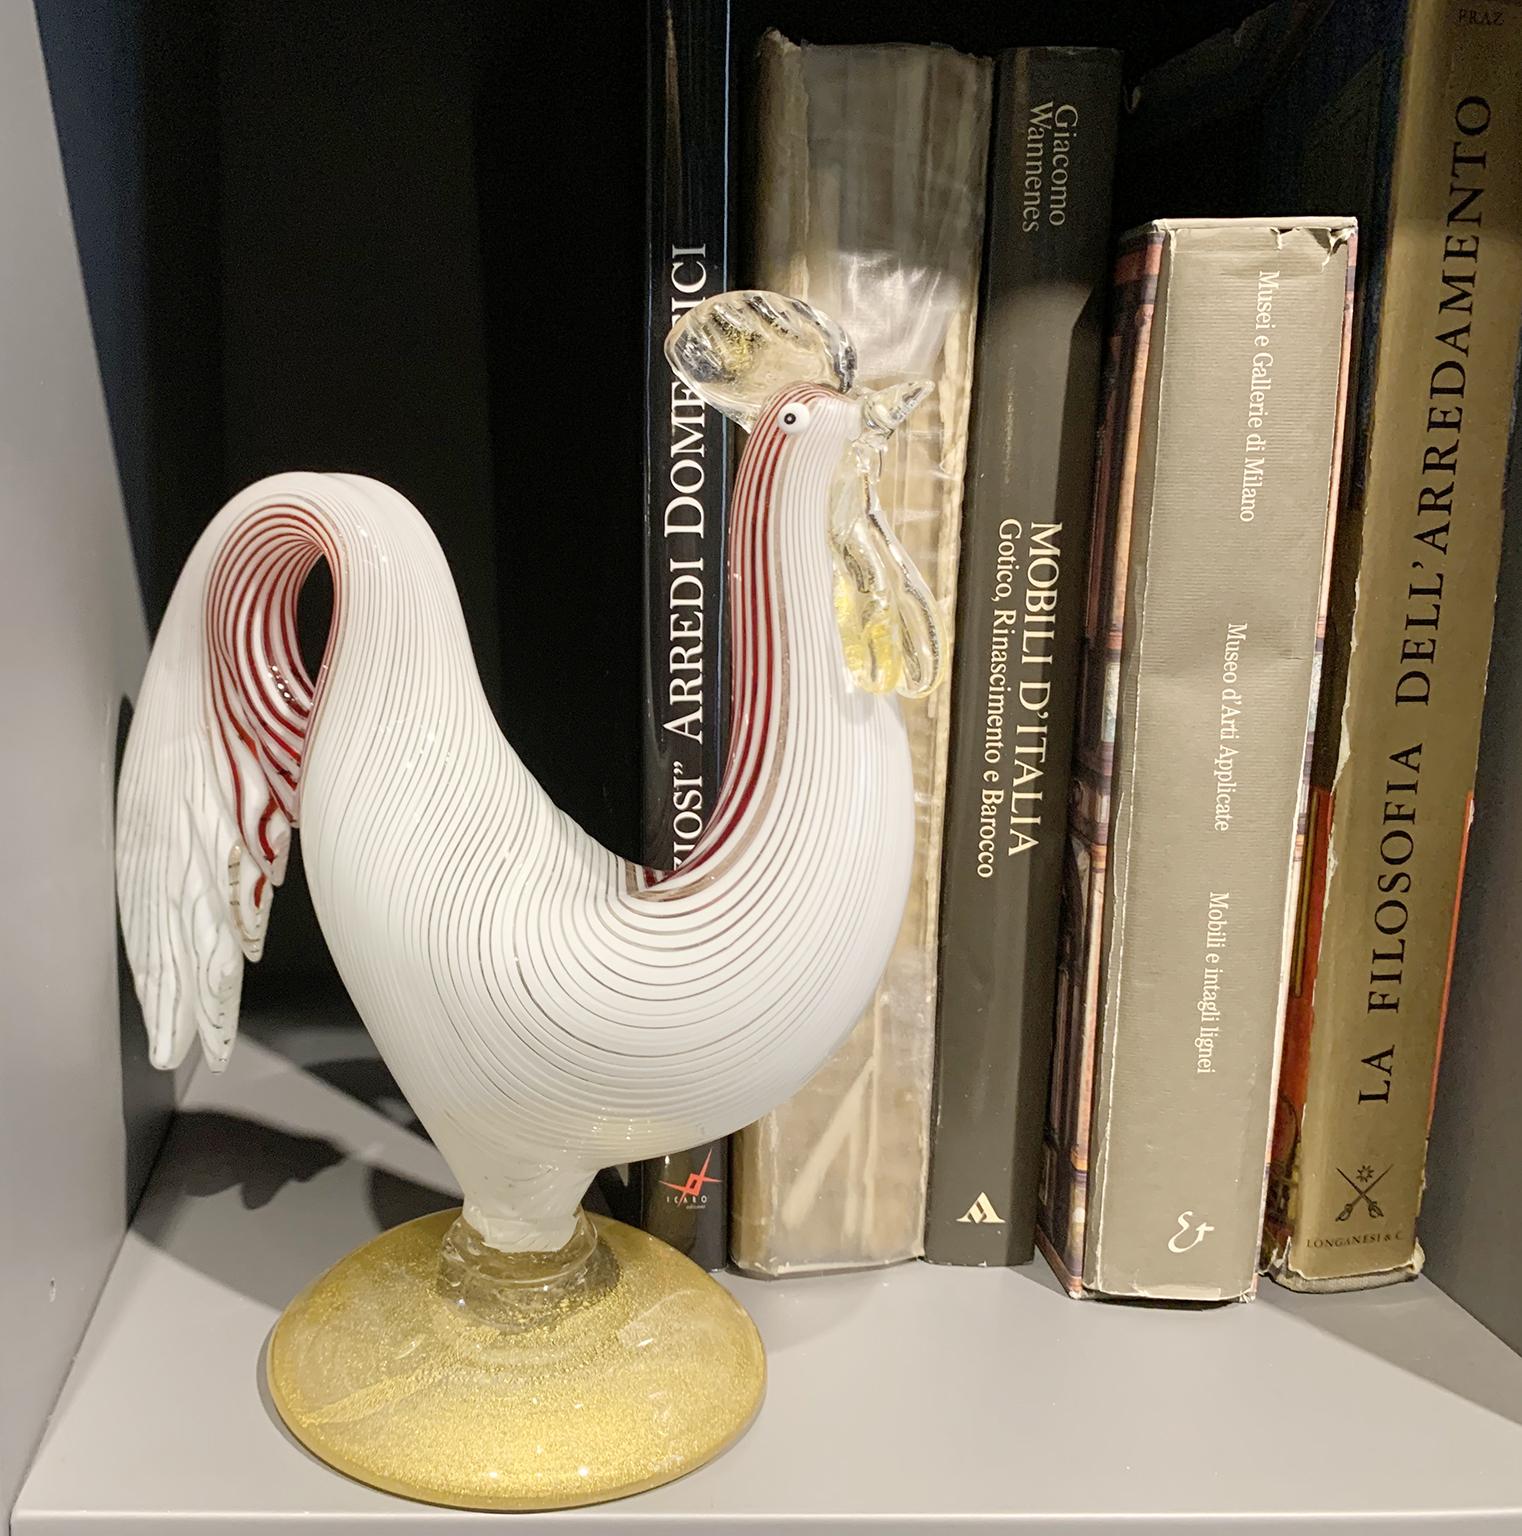 Murano Glass Rooster-Shaped Sculpture, Dino Martens, Venice Aureliano Toso, 1954 For Sale 6